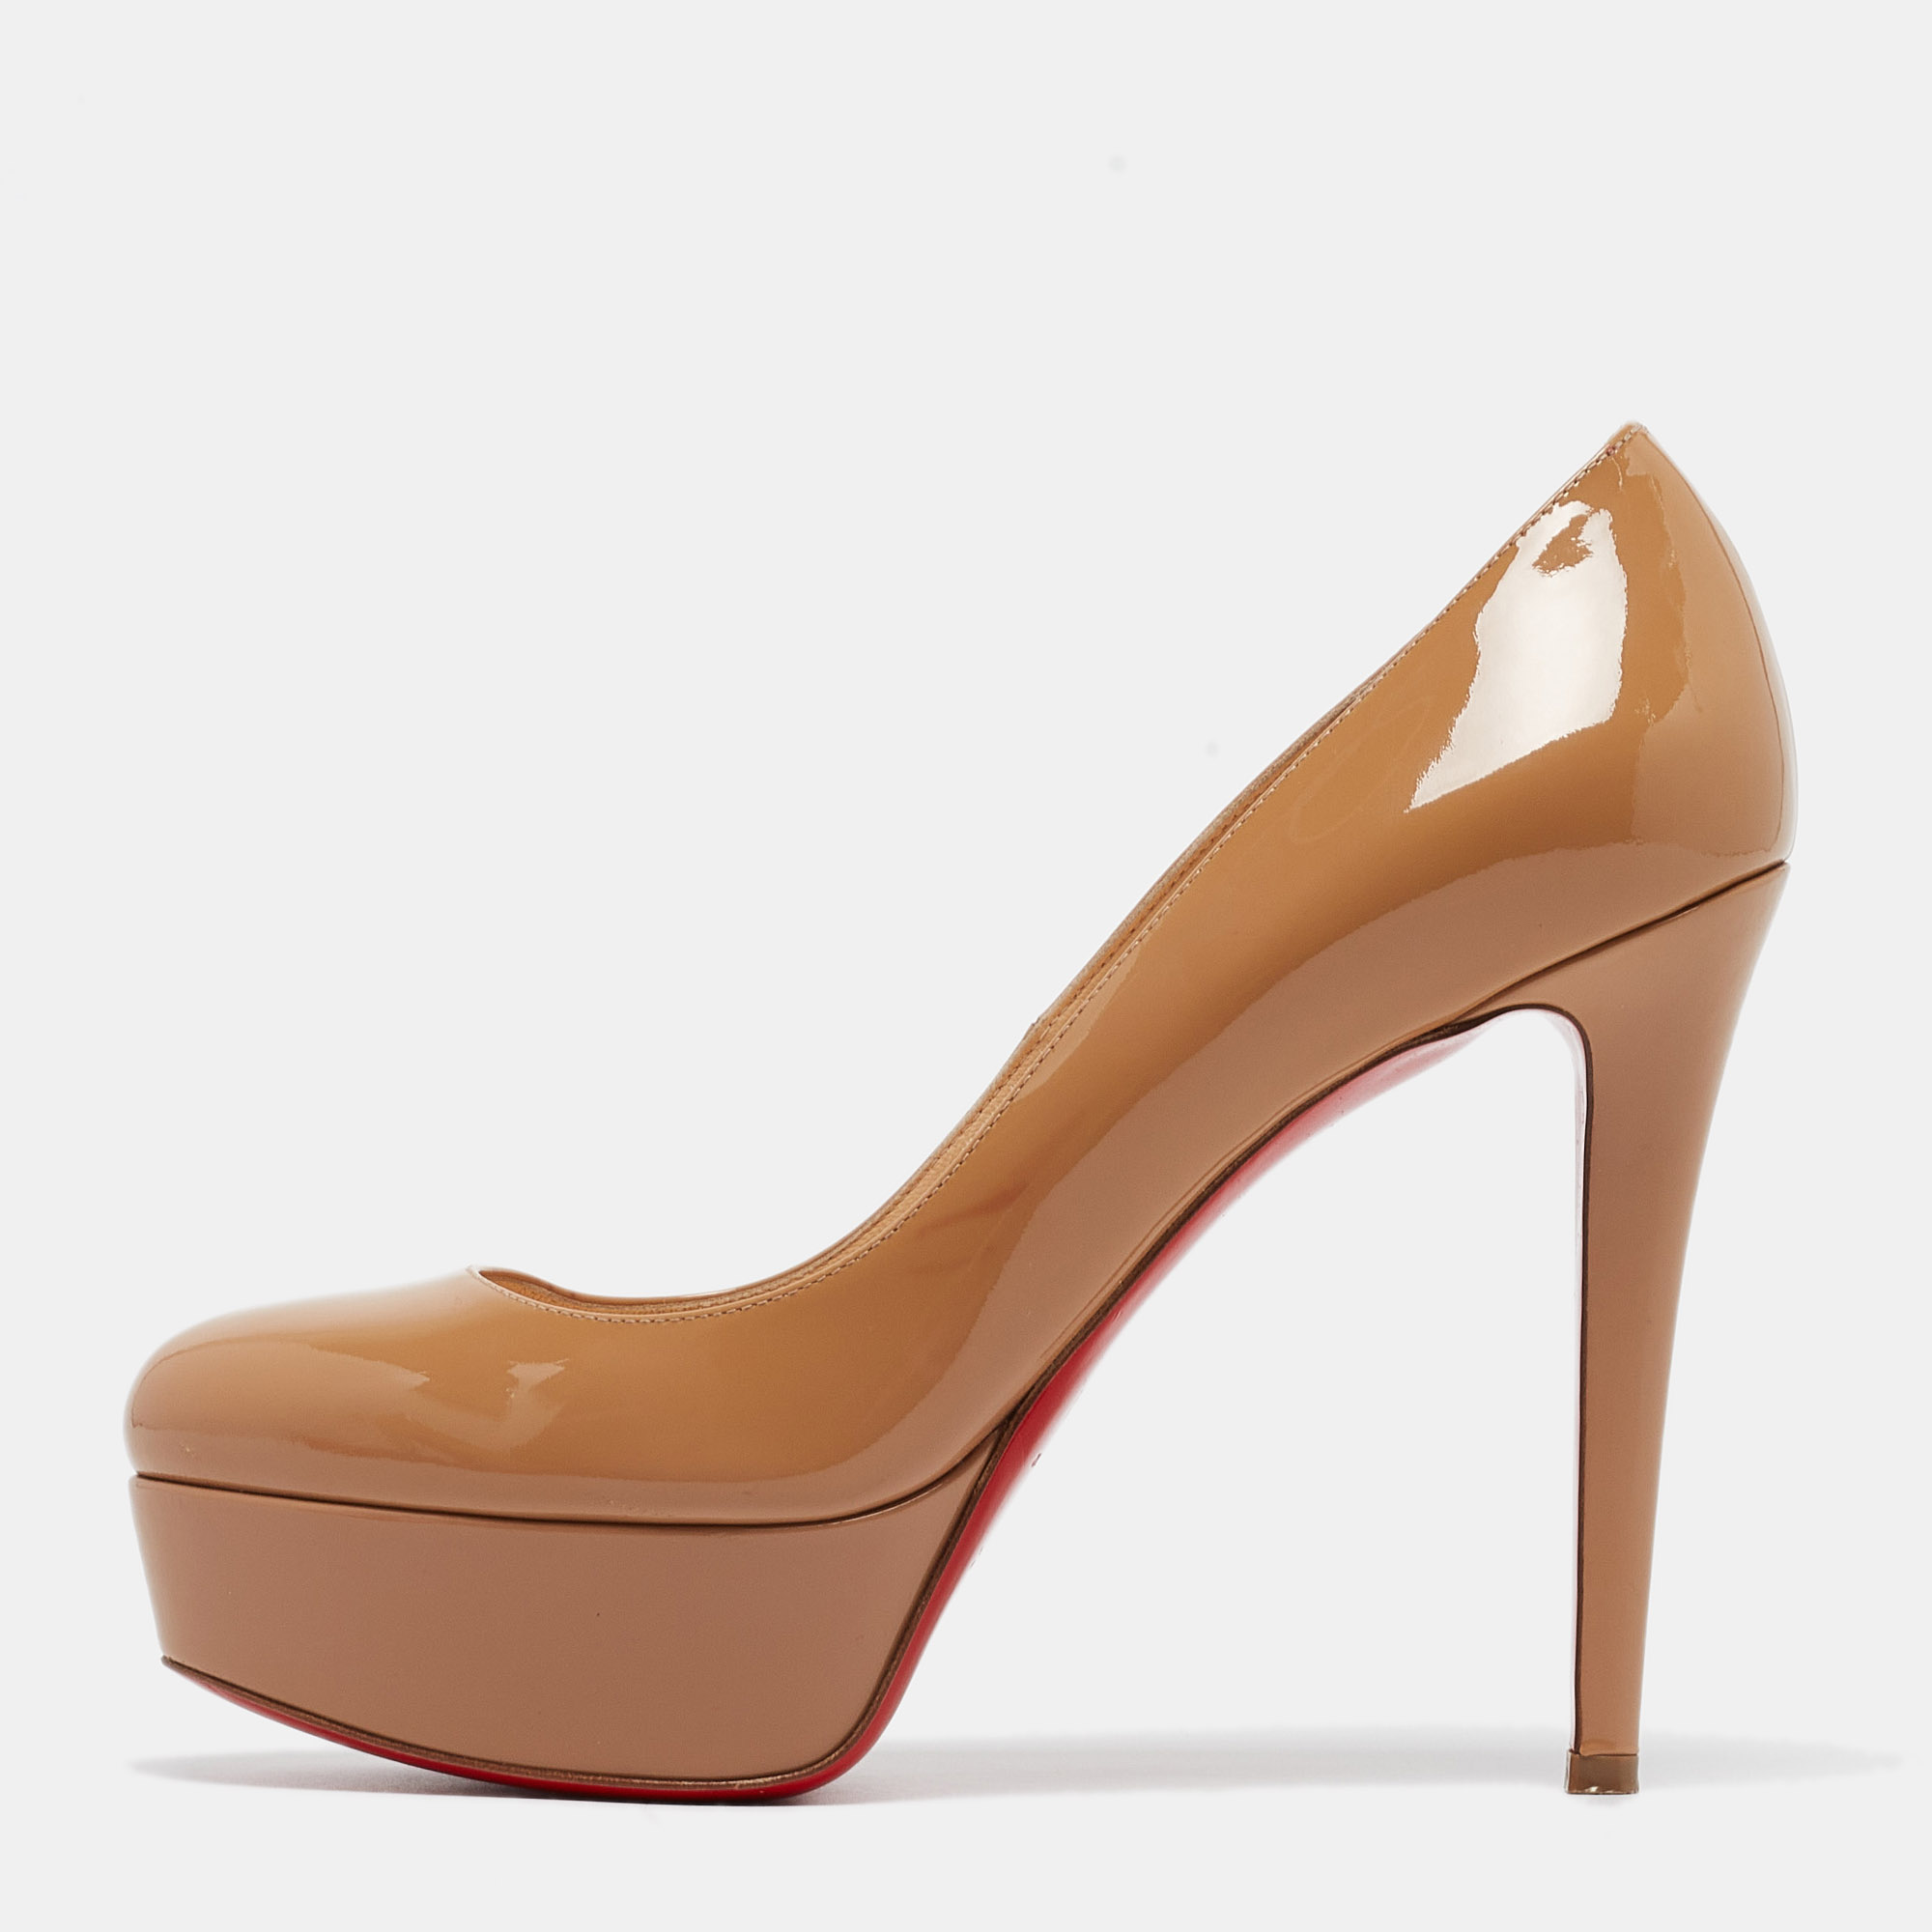 Christian louboutin beige patent leather bianca pumps size 38.5